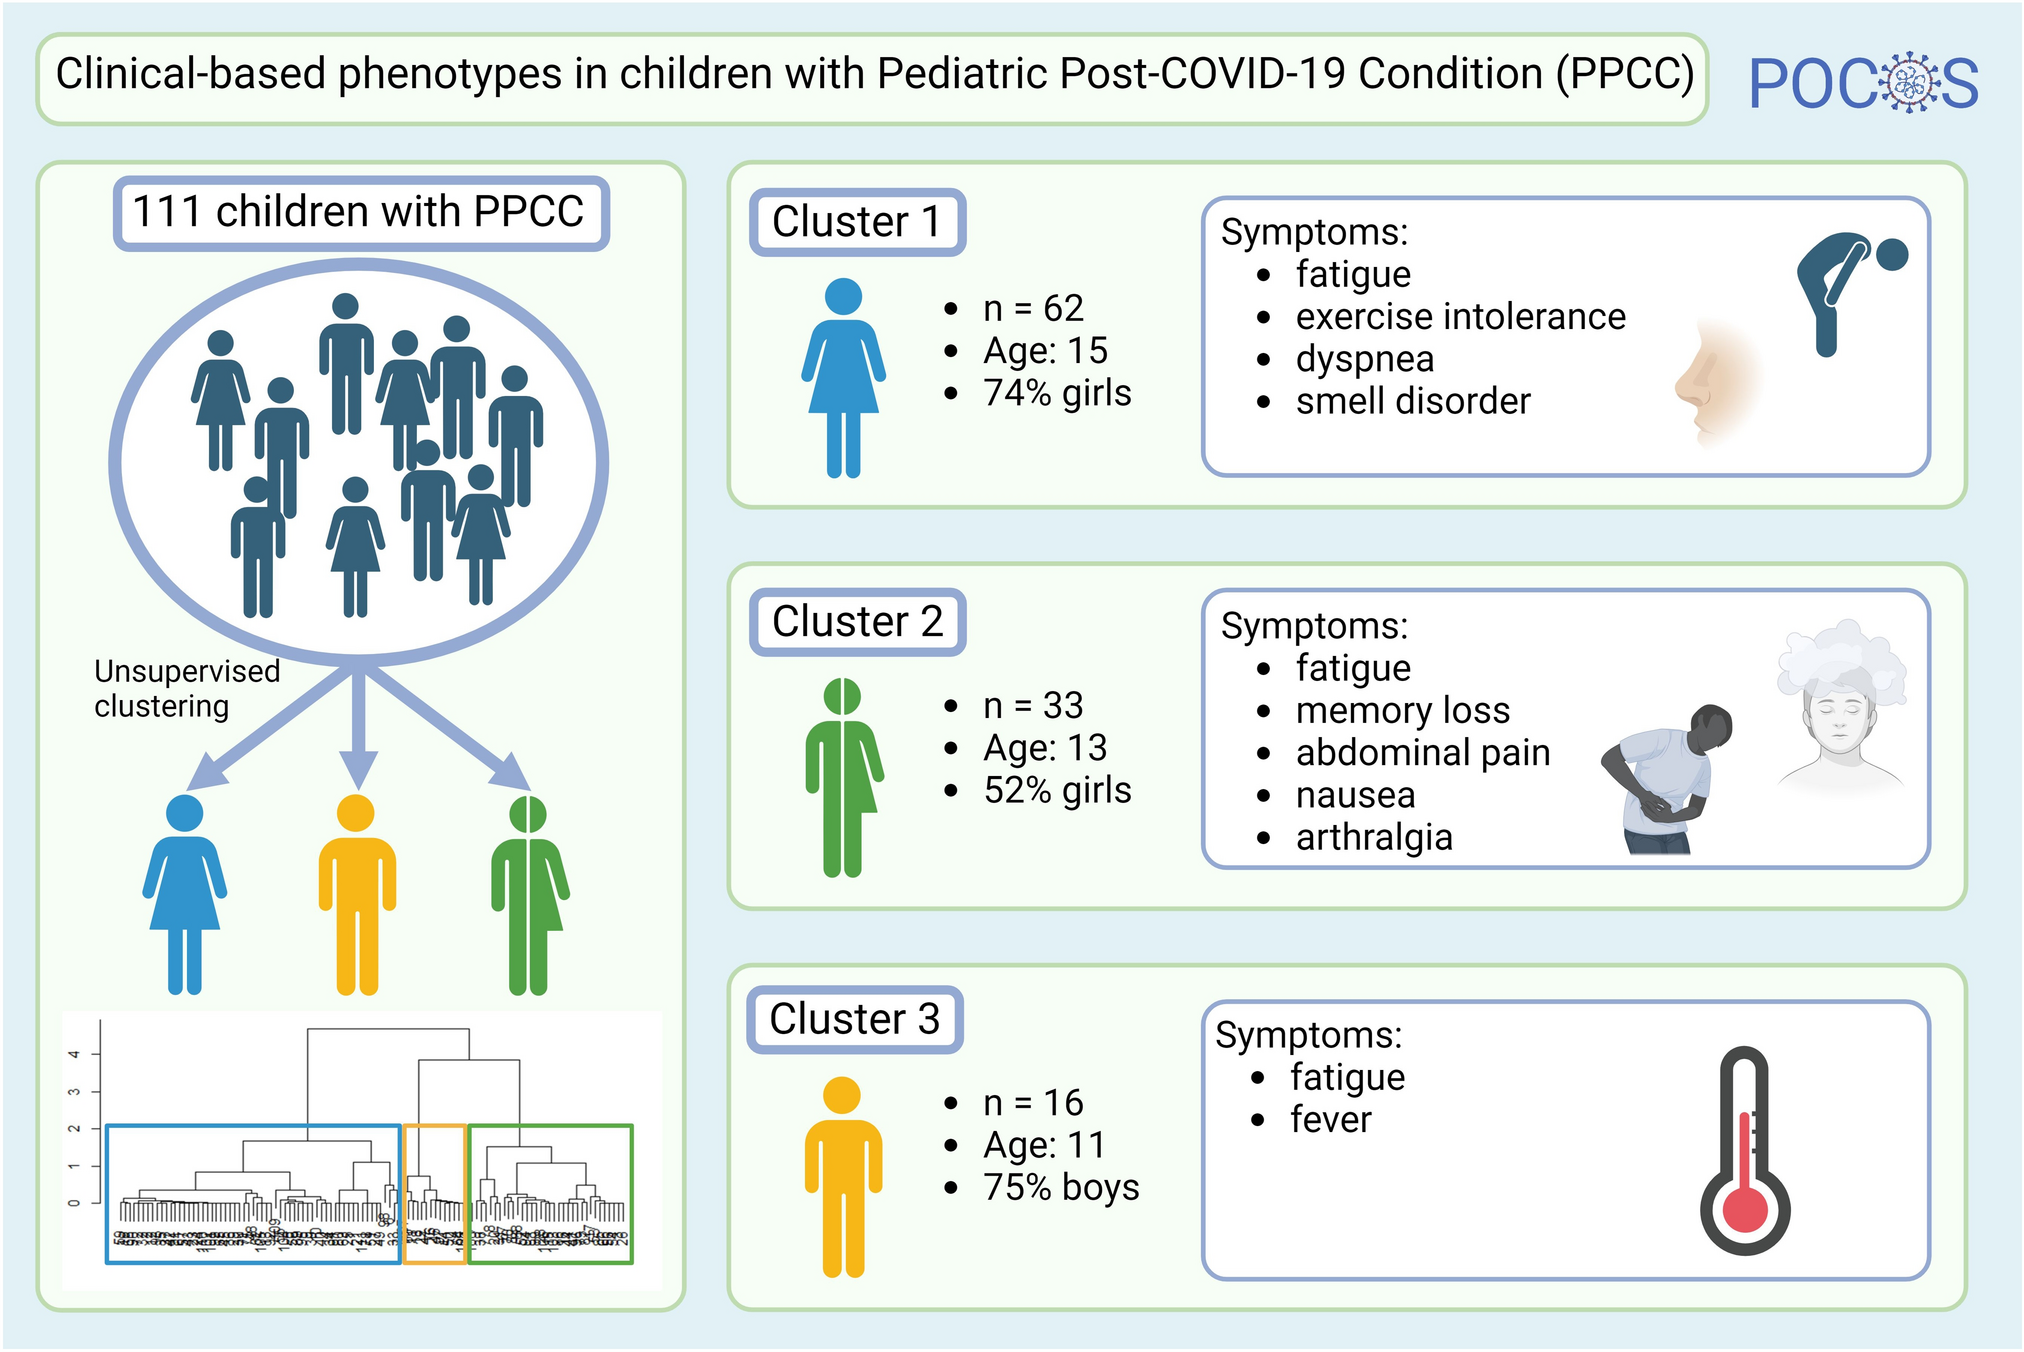 Clinical-based phenotypes in children with pediatric post-COVID-19 condition